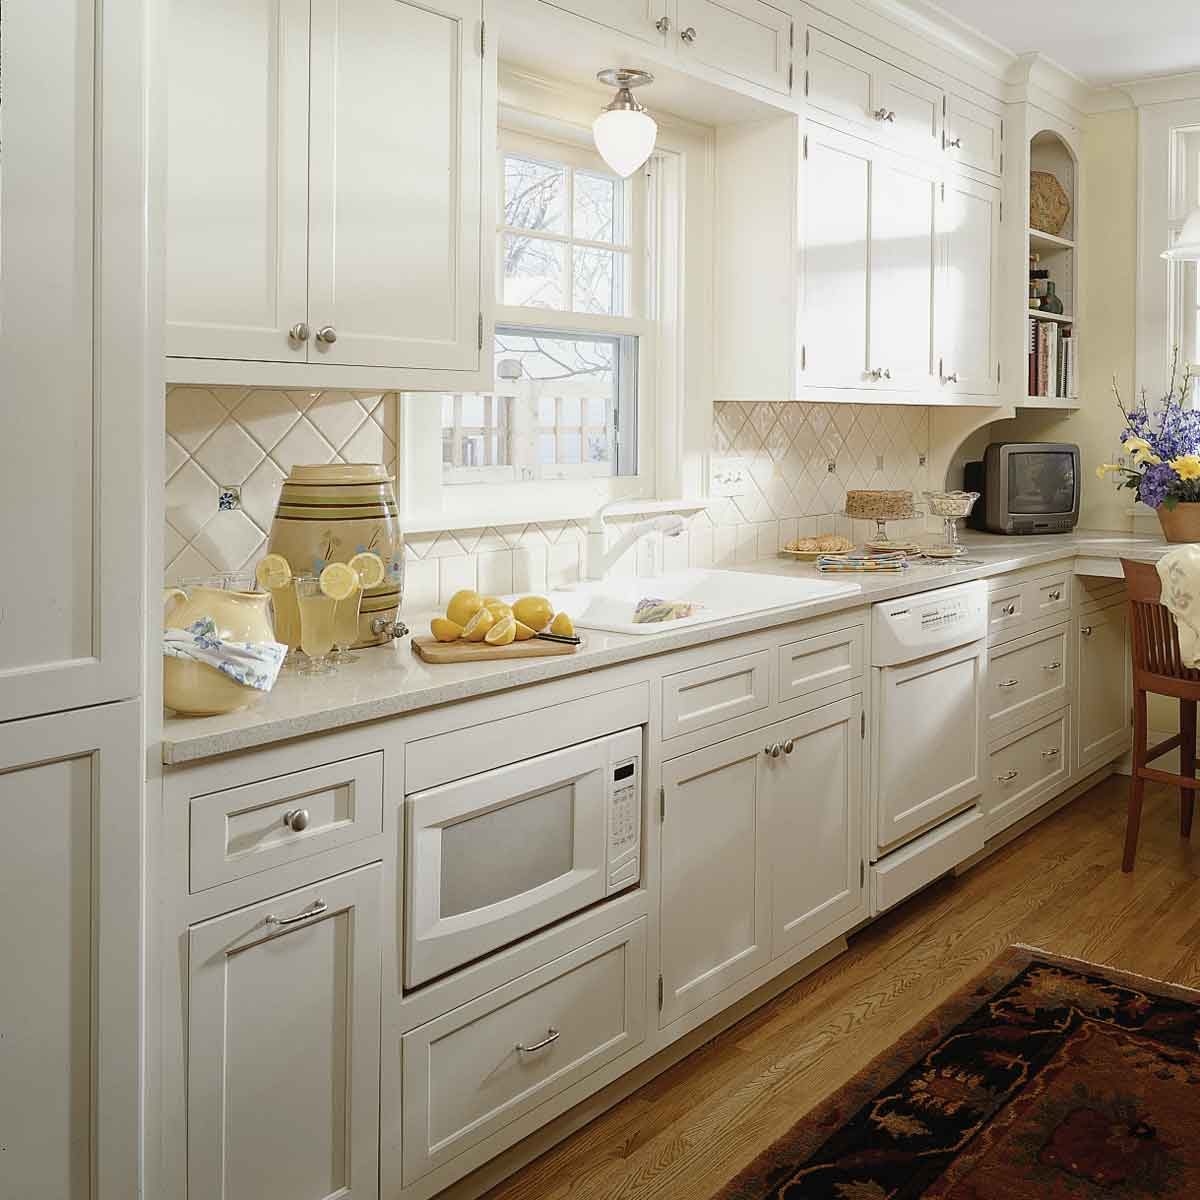 https://www.familyhandyman.com/wp-content/uploads/2019/09/FH05OCT_462_50_S02_OTU-small-kitchen-ideas-build-in-microwave.jpg?fit=696%2C696